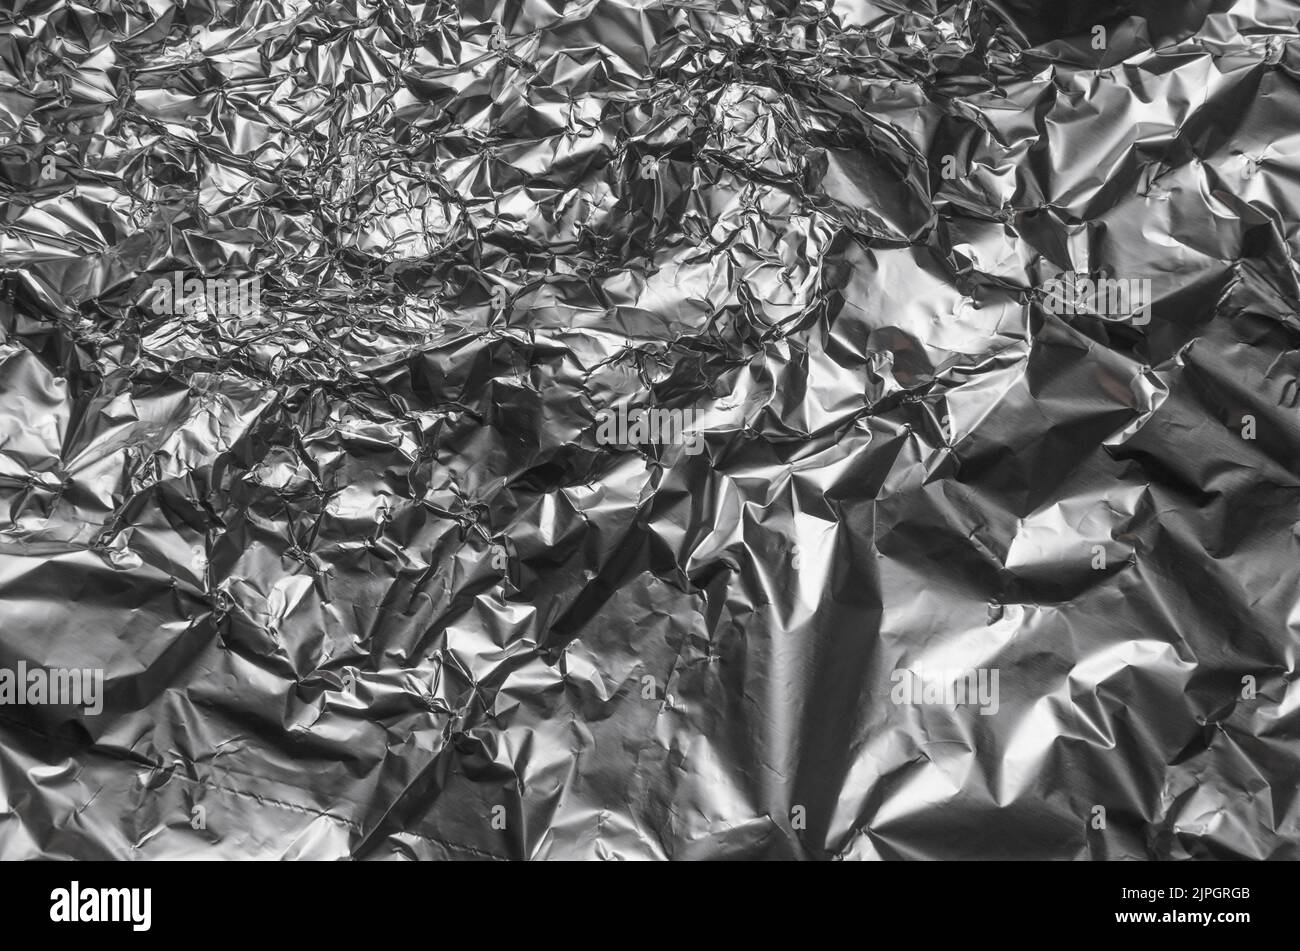 Abstract background of crumpled silver aluminium foil, flat lay view from directly above Stock Photo